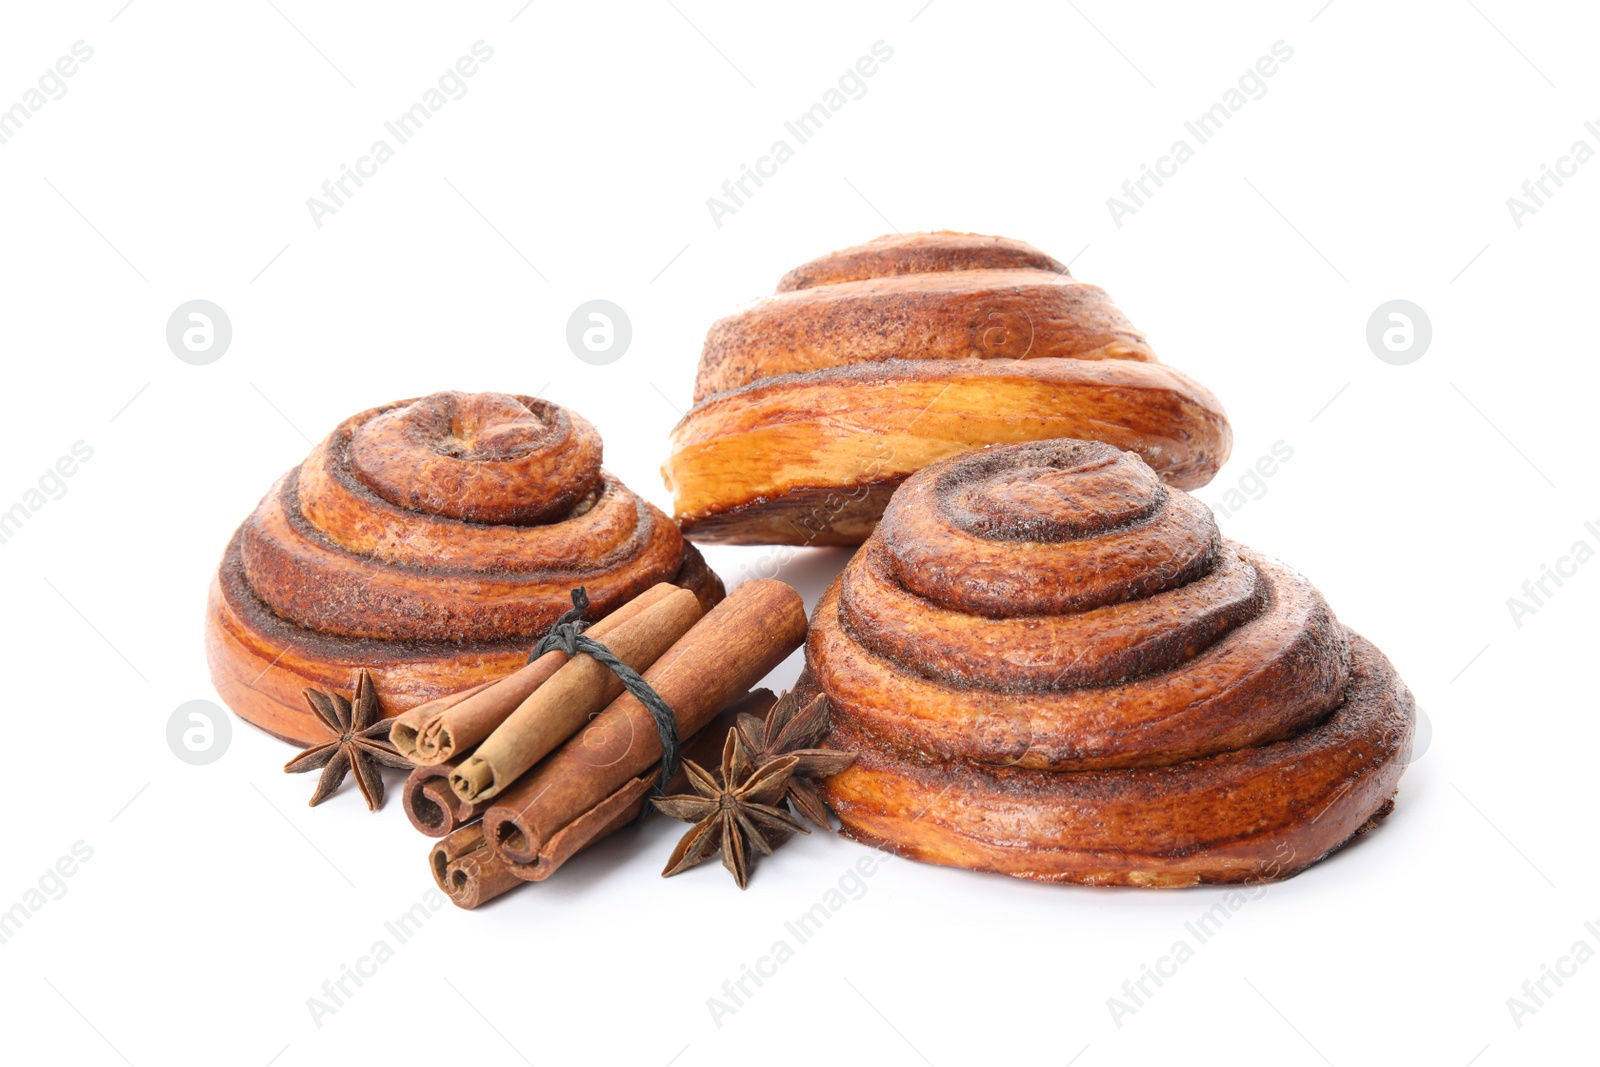 Photo of Freshly baked cinnamon rolls with ingredients on white background